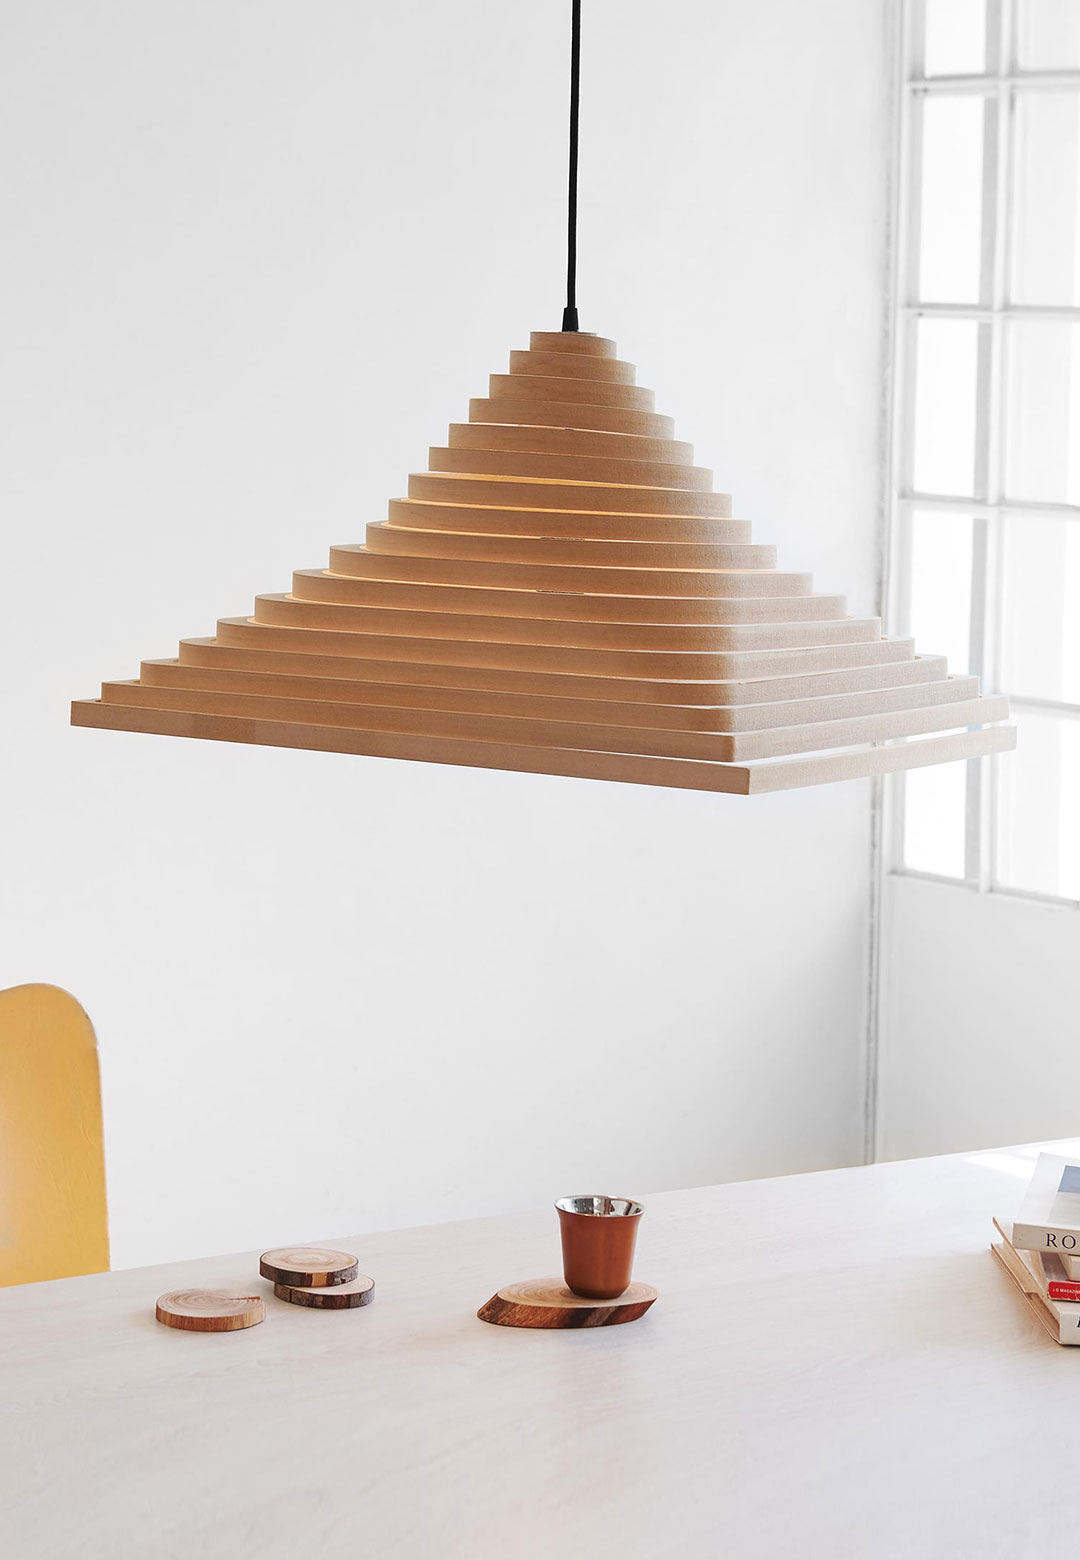 Guillermo Lean’s Spinel is a collapsible pendant light made of plywood